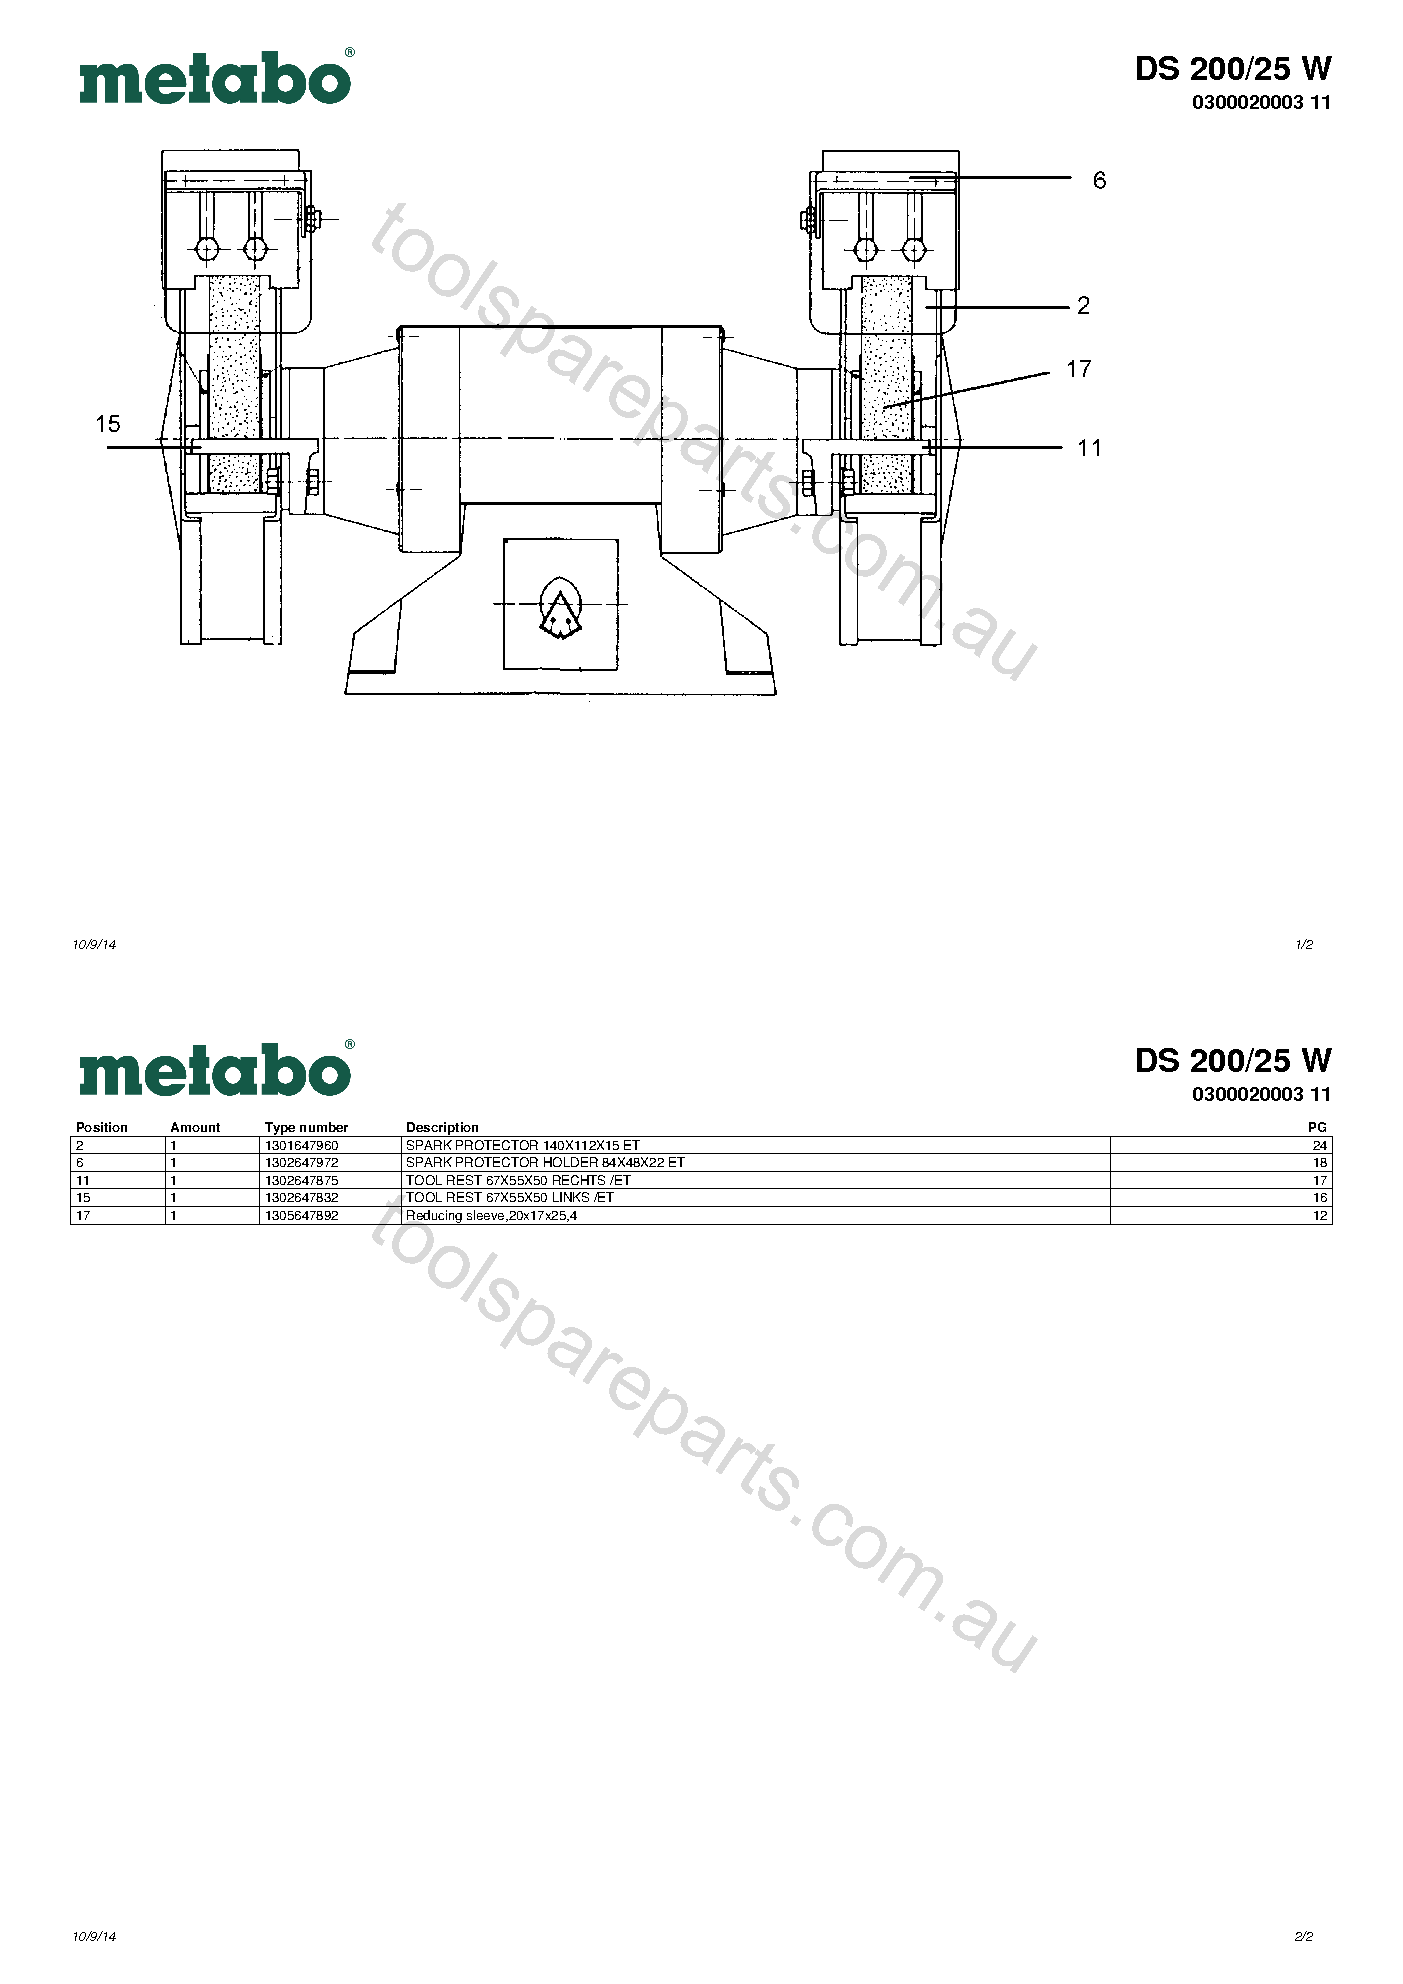 Metabo DS 200/25 W 0300020003 11  Diagram 1